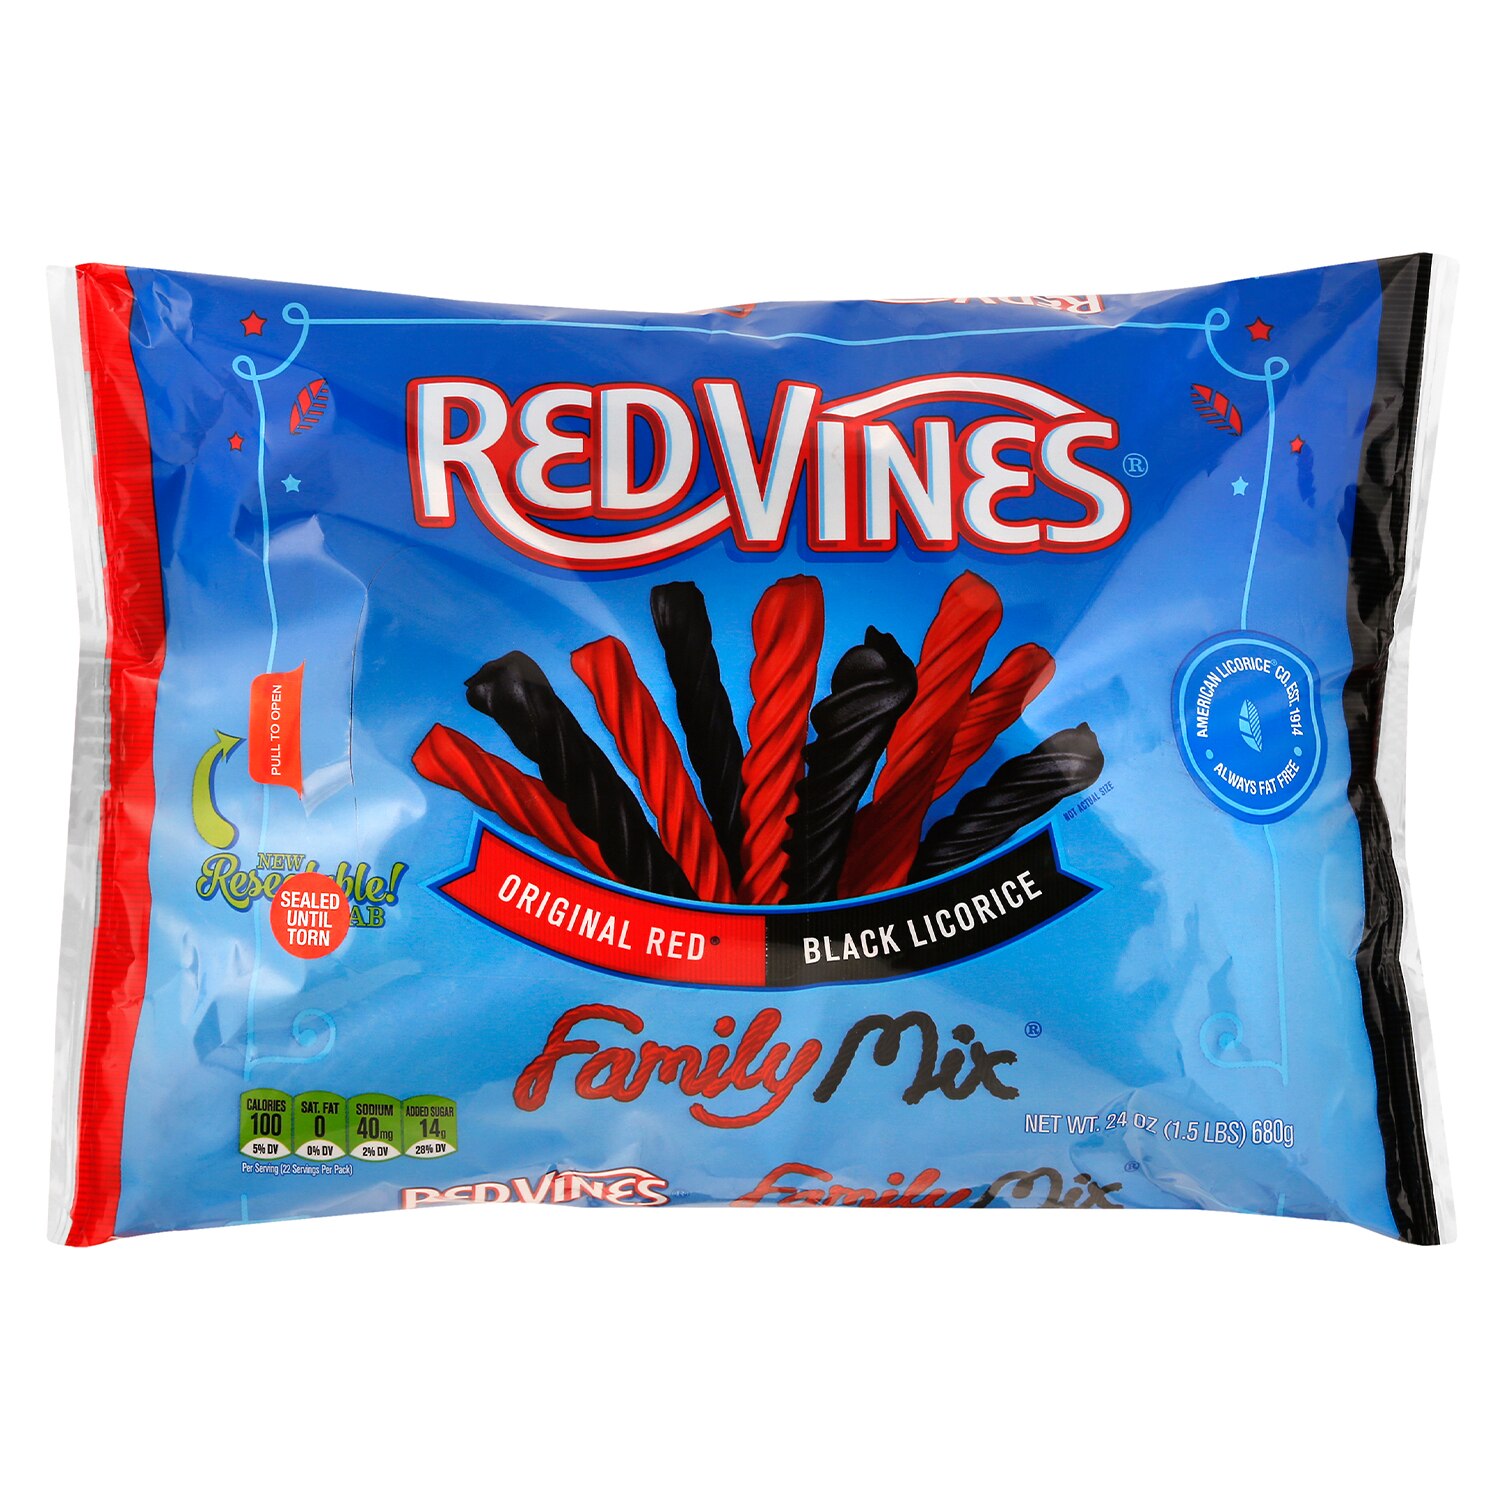 Red Vines Family Mix Resealable Bag, 24 OZ